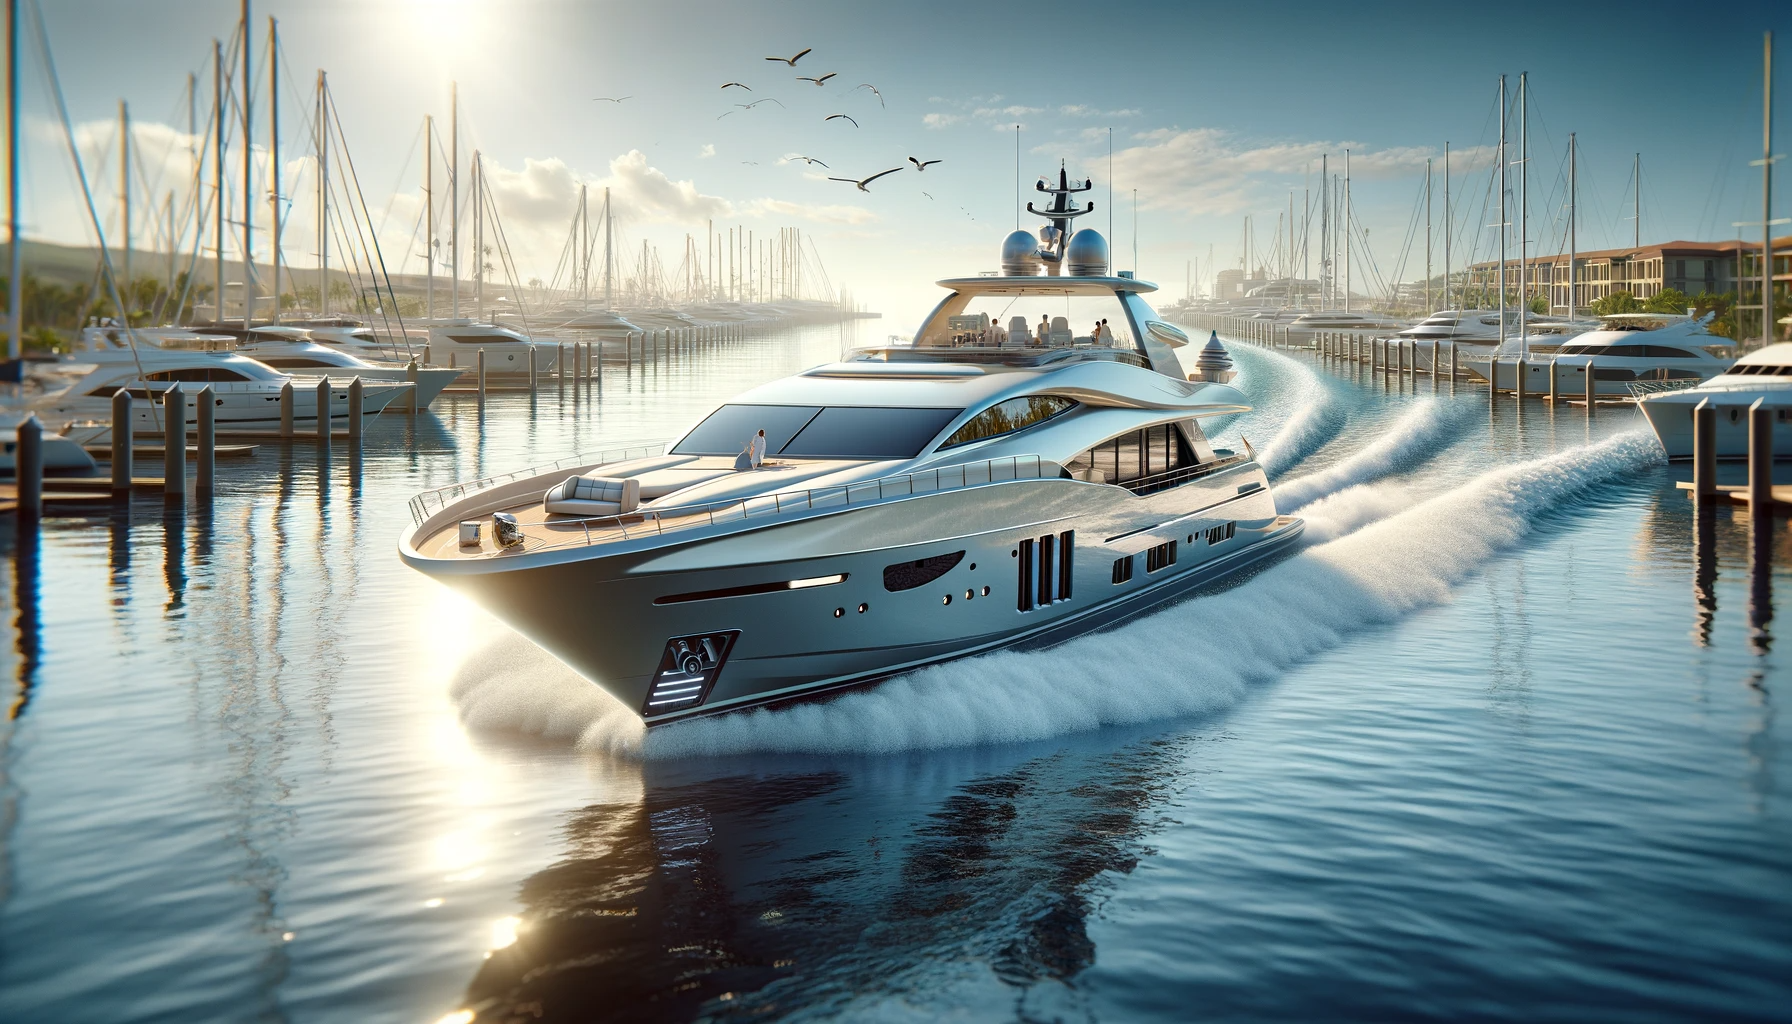 when were luxury yachts invented